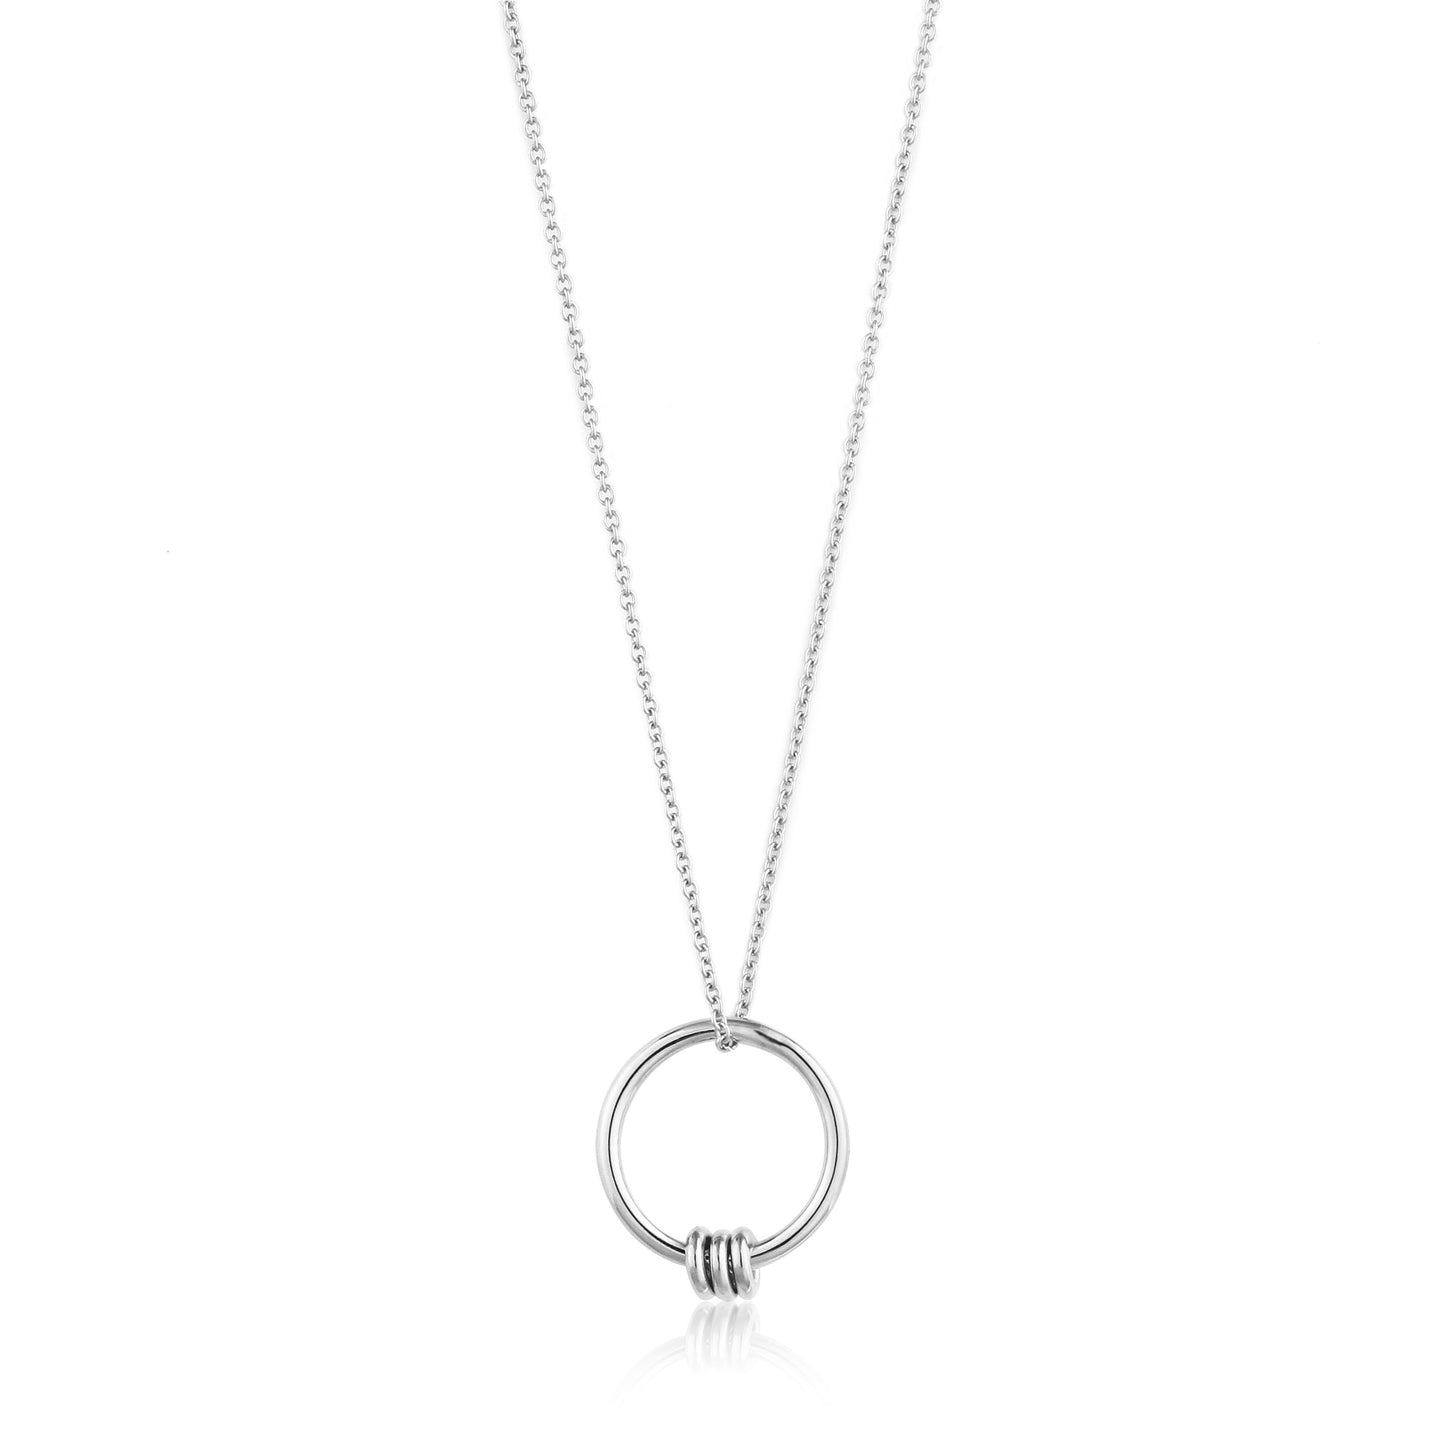 ANIA HAIE ANIA HAIE - Silver Modern Circle Necklace available at The Good Life Boutique